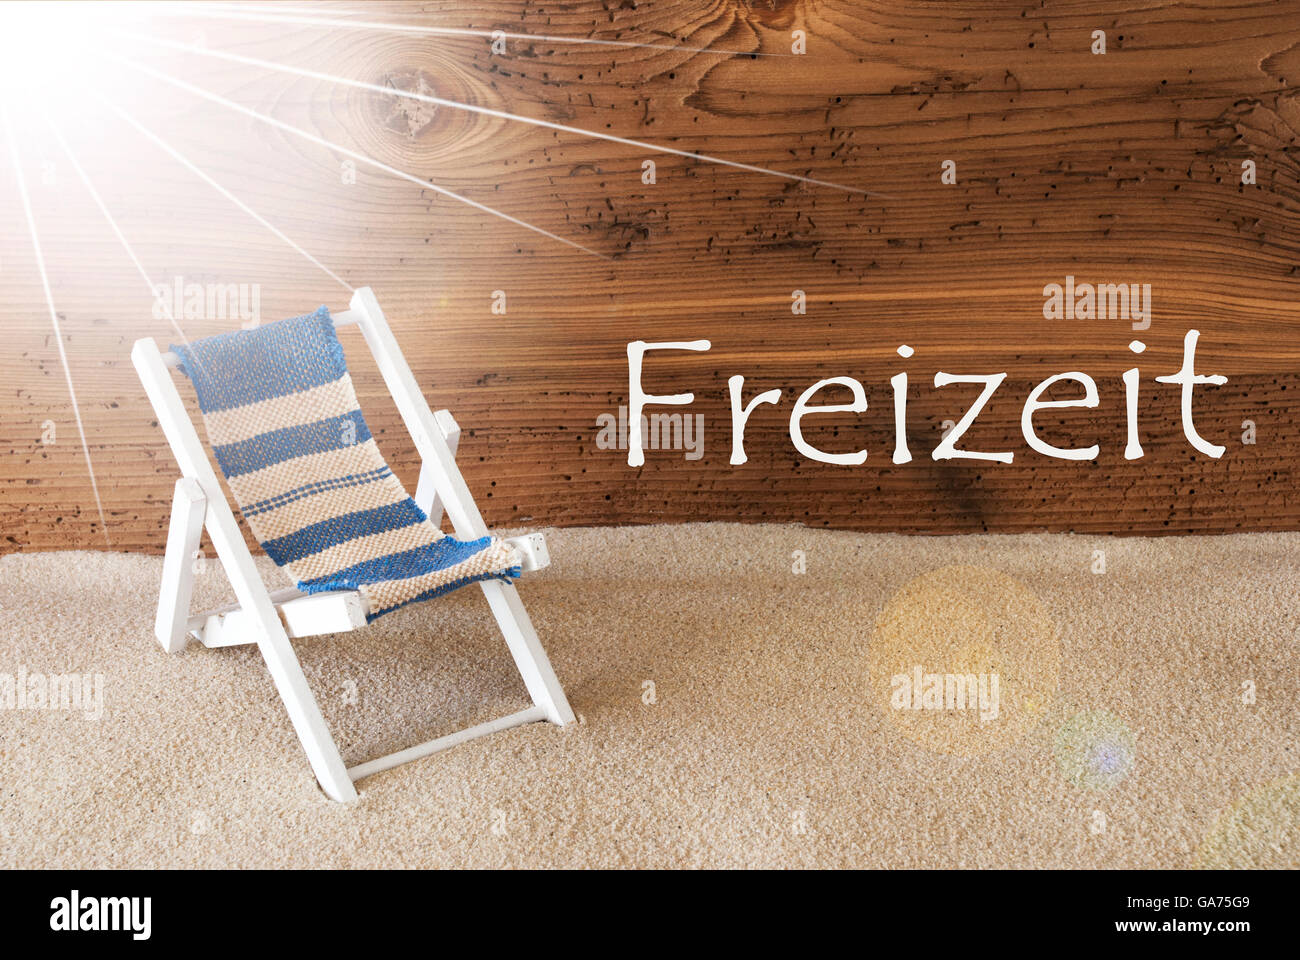 Summer Sunny Greeting Card, Freizeit Means Leisure Time Stock Photo